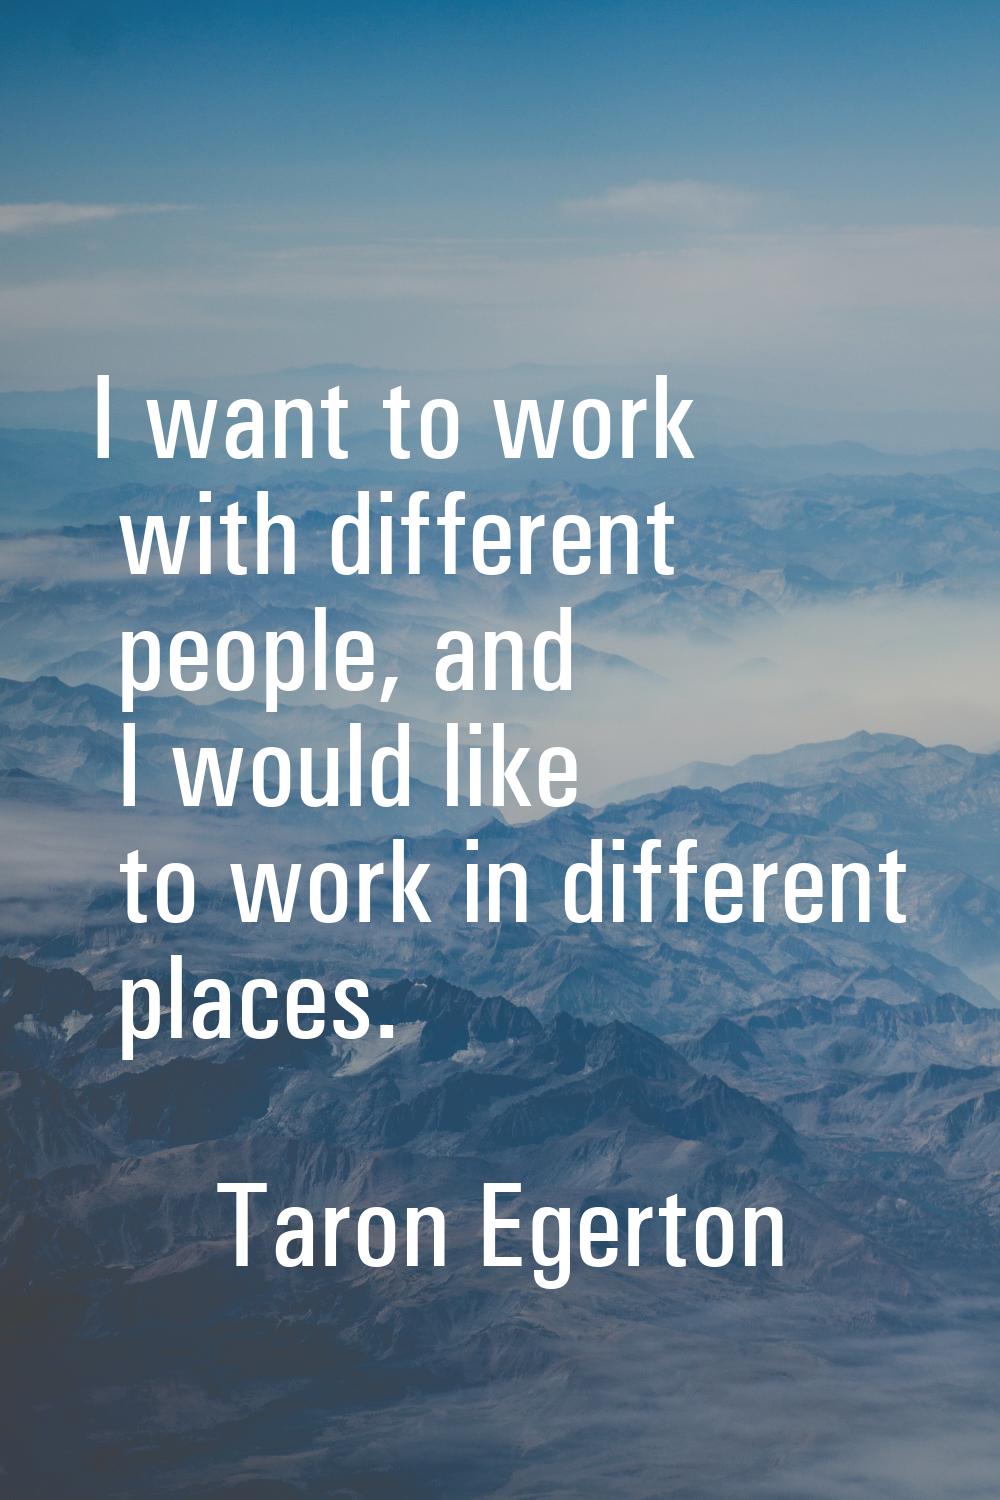 I want to work with different people, and I would like to work in different places.